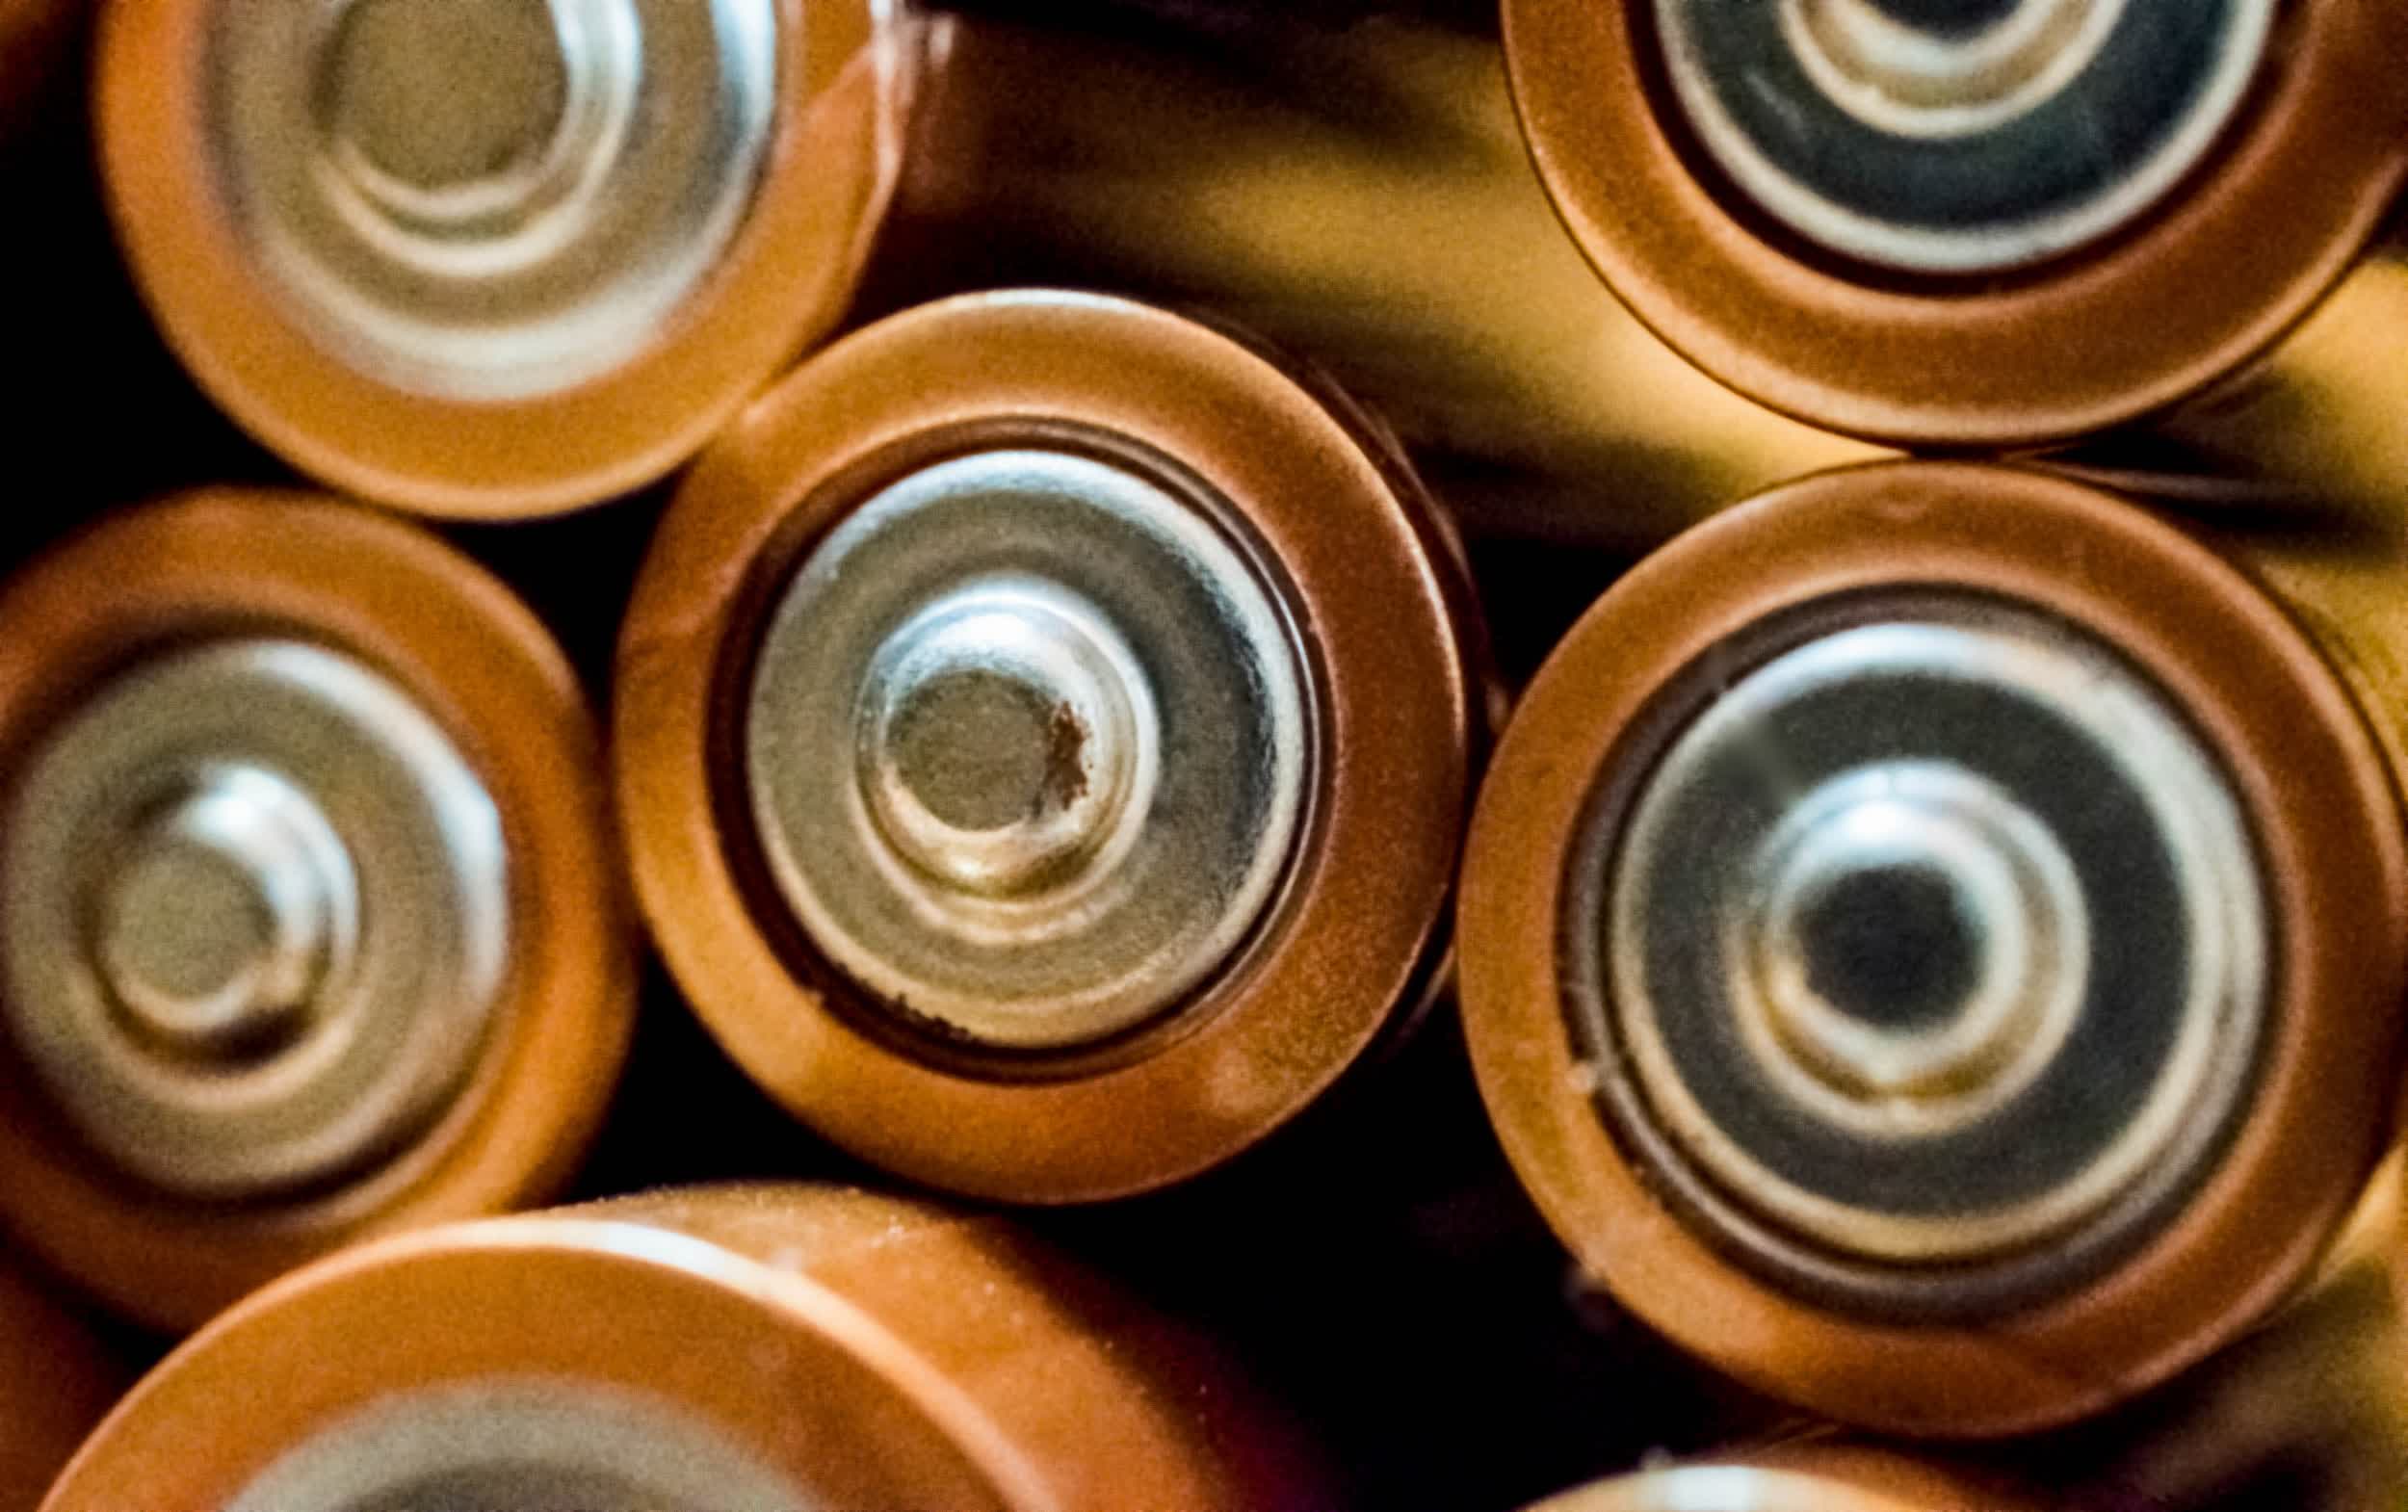 Scientists cook up a rechargeable battery that's safe to eat